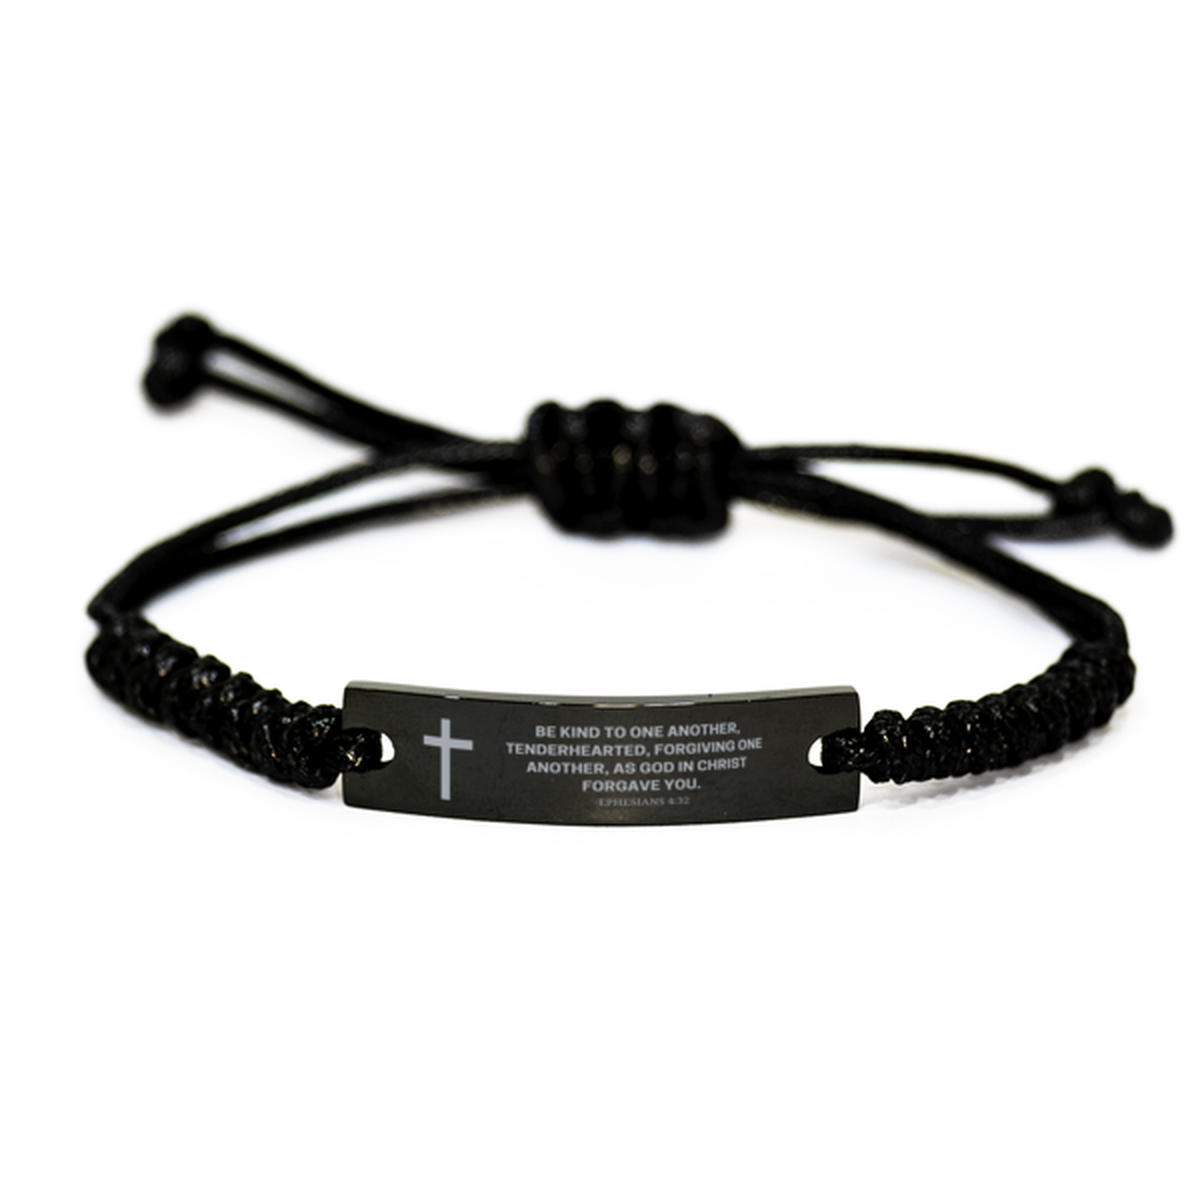 Baptism Gifts For Teenage Boys Girls, Christian Bible Verse Black Rope Bracelet, Be kind to one another, Catholic Confirmation Gifts for Son, Godson, Grandson, Nephew